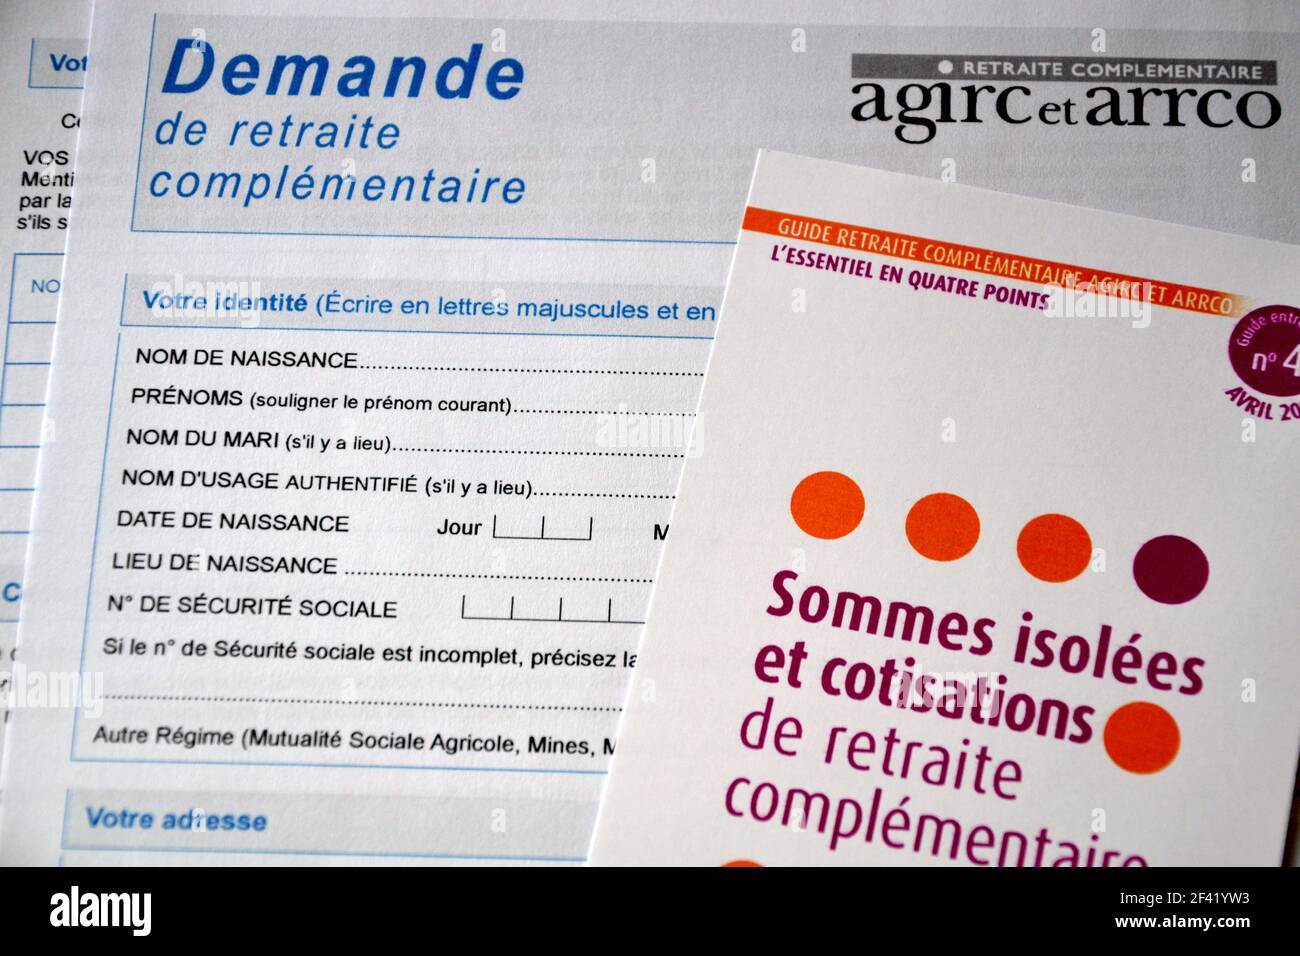 In this photo illustration, a brochure on a supplementary pension application form.The supplementary pension scheme for executives and private sector employees Agirc-Arrco announced a deficit of 4.8 billion euros for the year 2020. Stock Photo